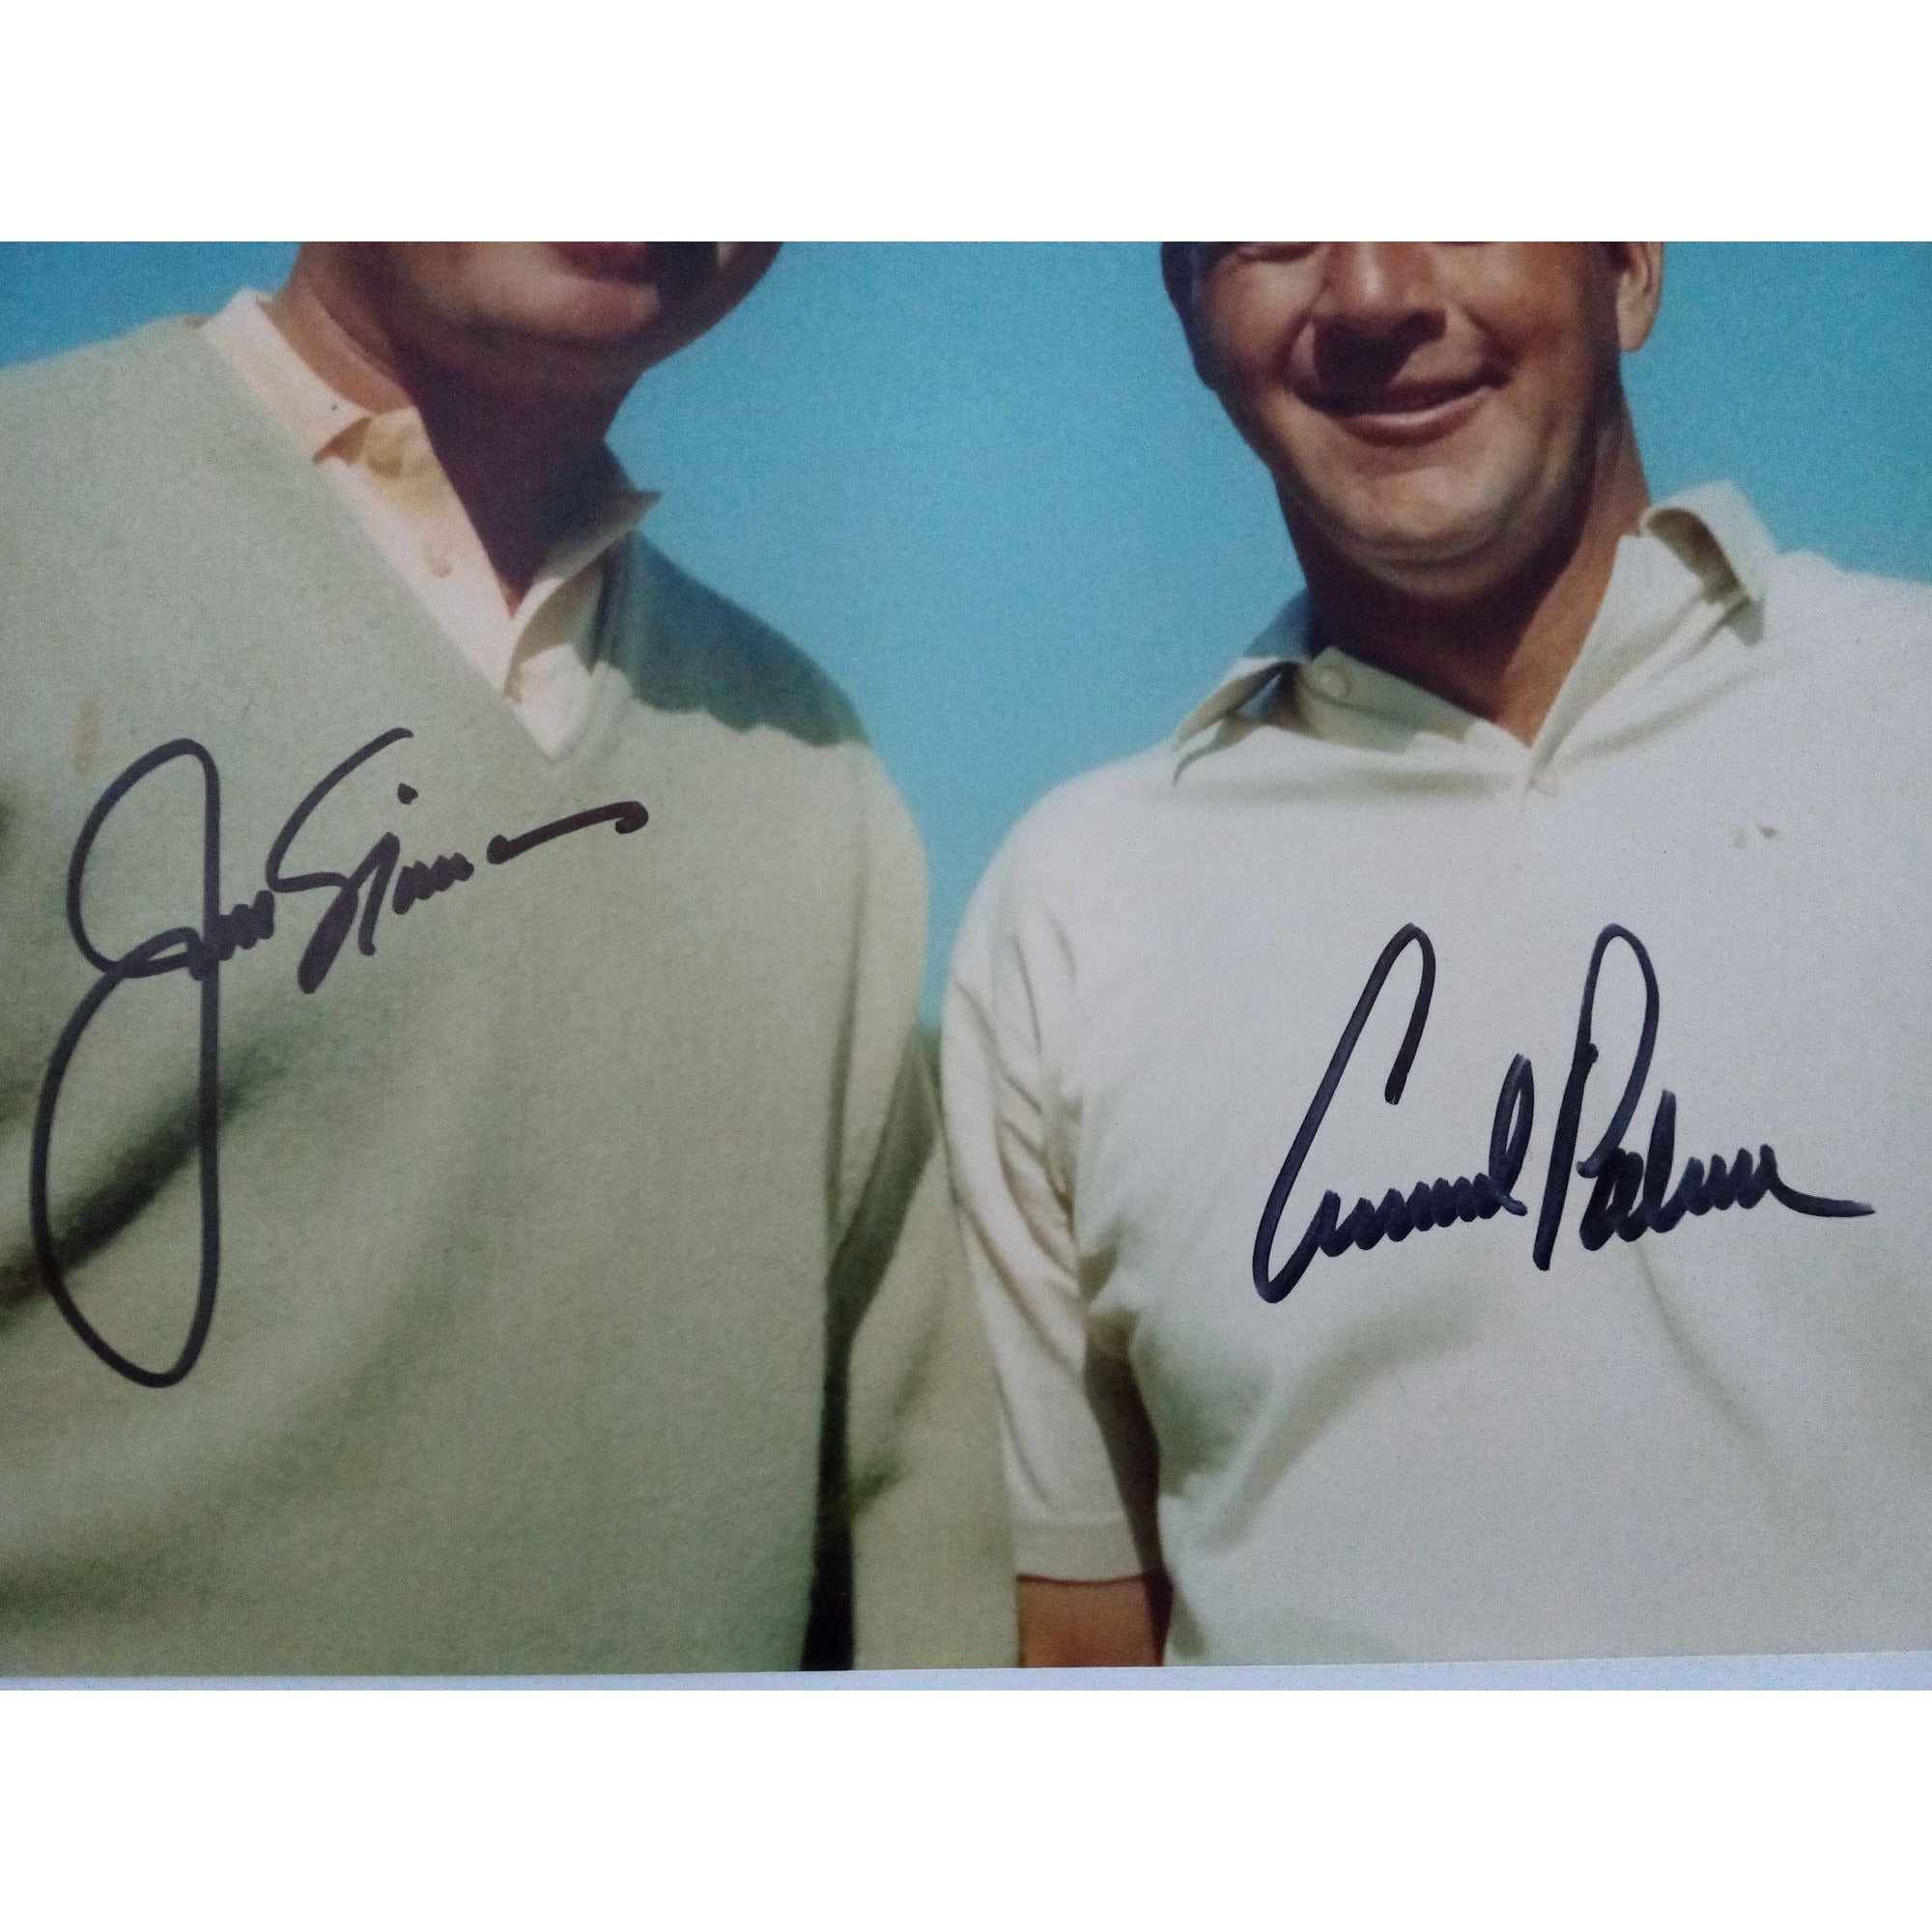 Jack Nicklaus and Arnold Palmer 8 by 10 signed with proof